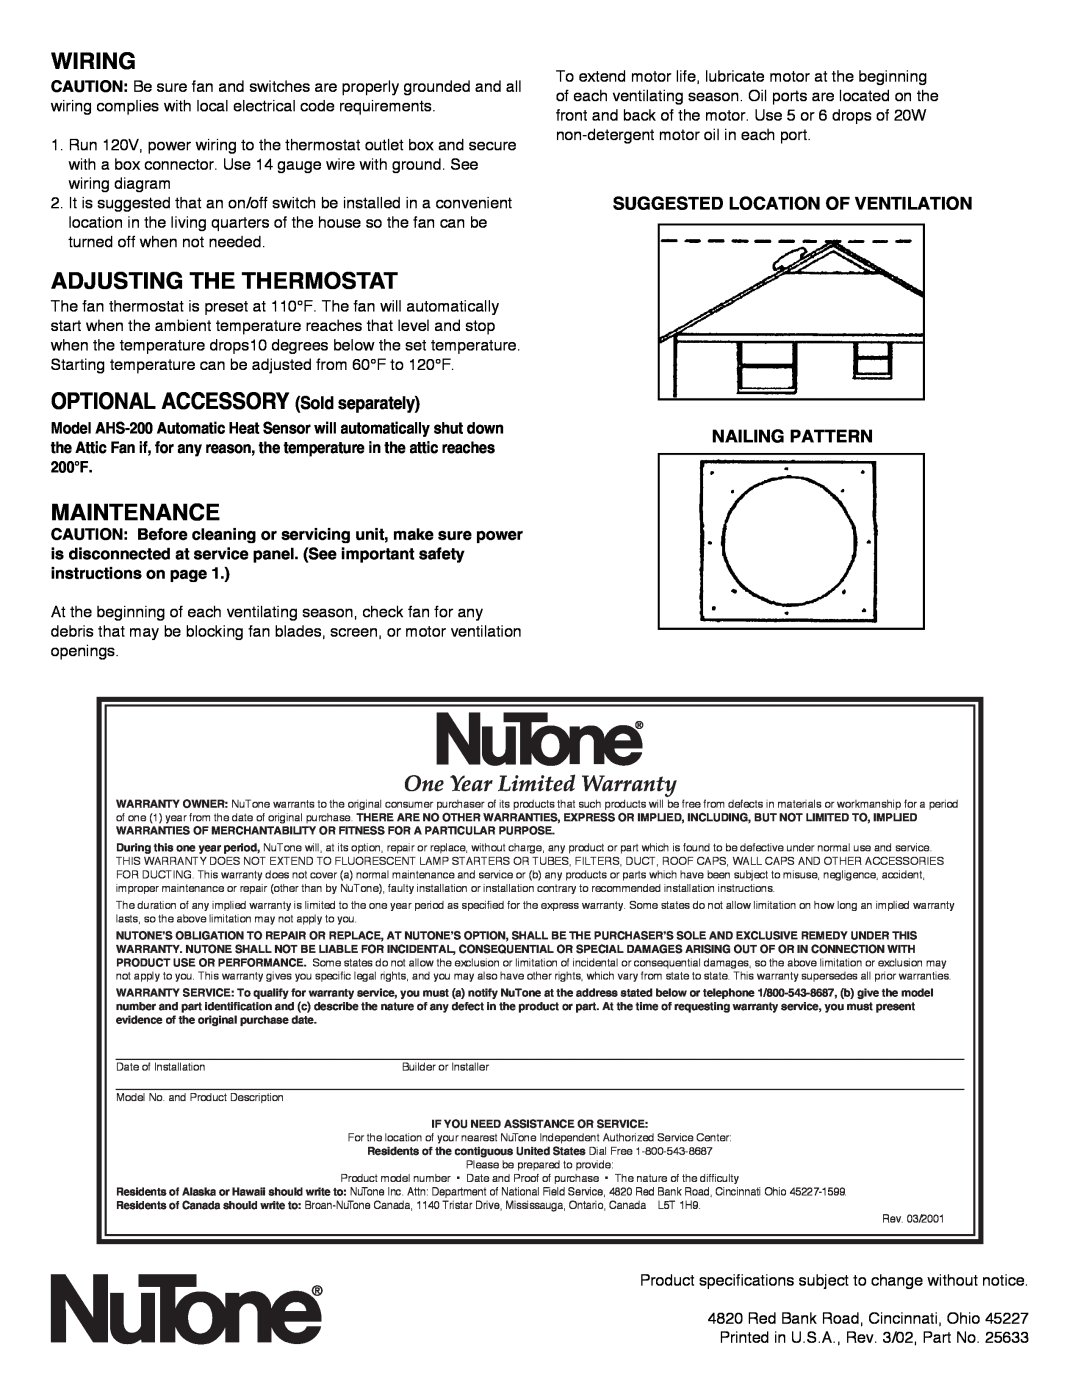 NuTone RF-49 Series Wiring, Adjusting The Thermostat, OPTIONAL ACCESSORY Sold separately, Maintenance 